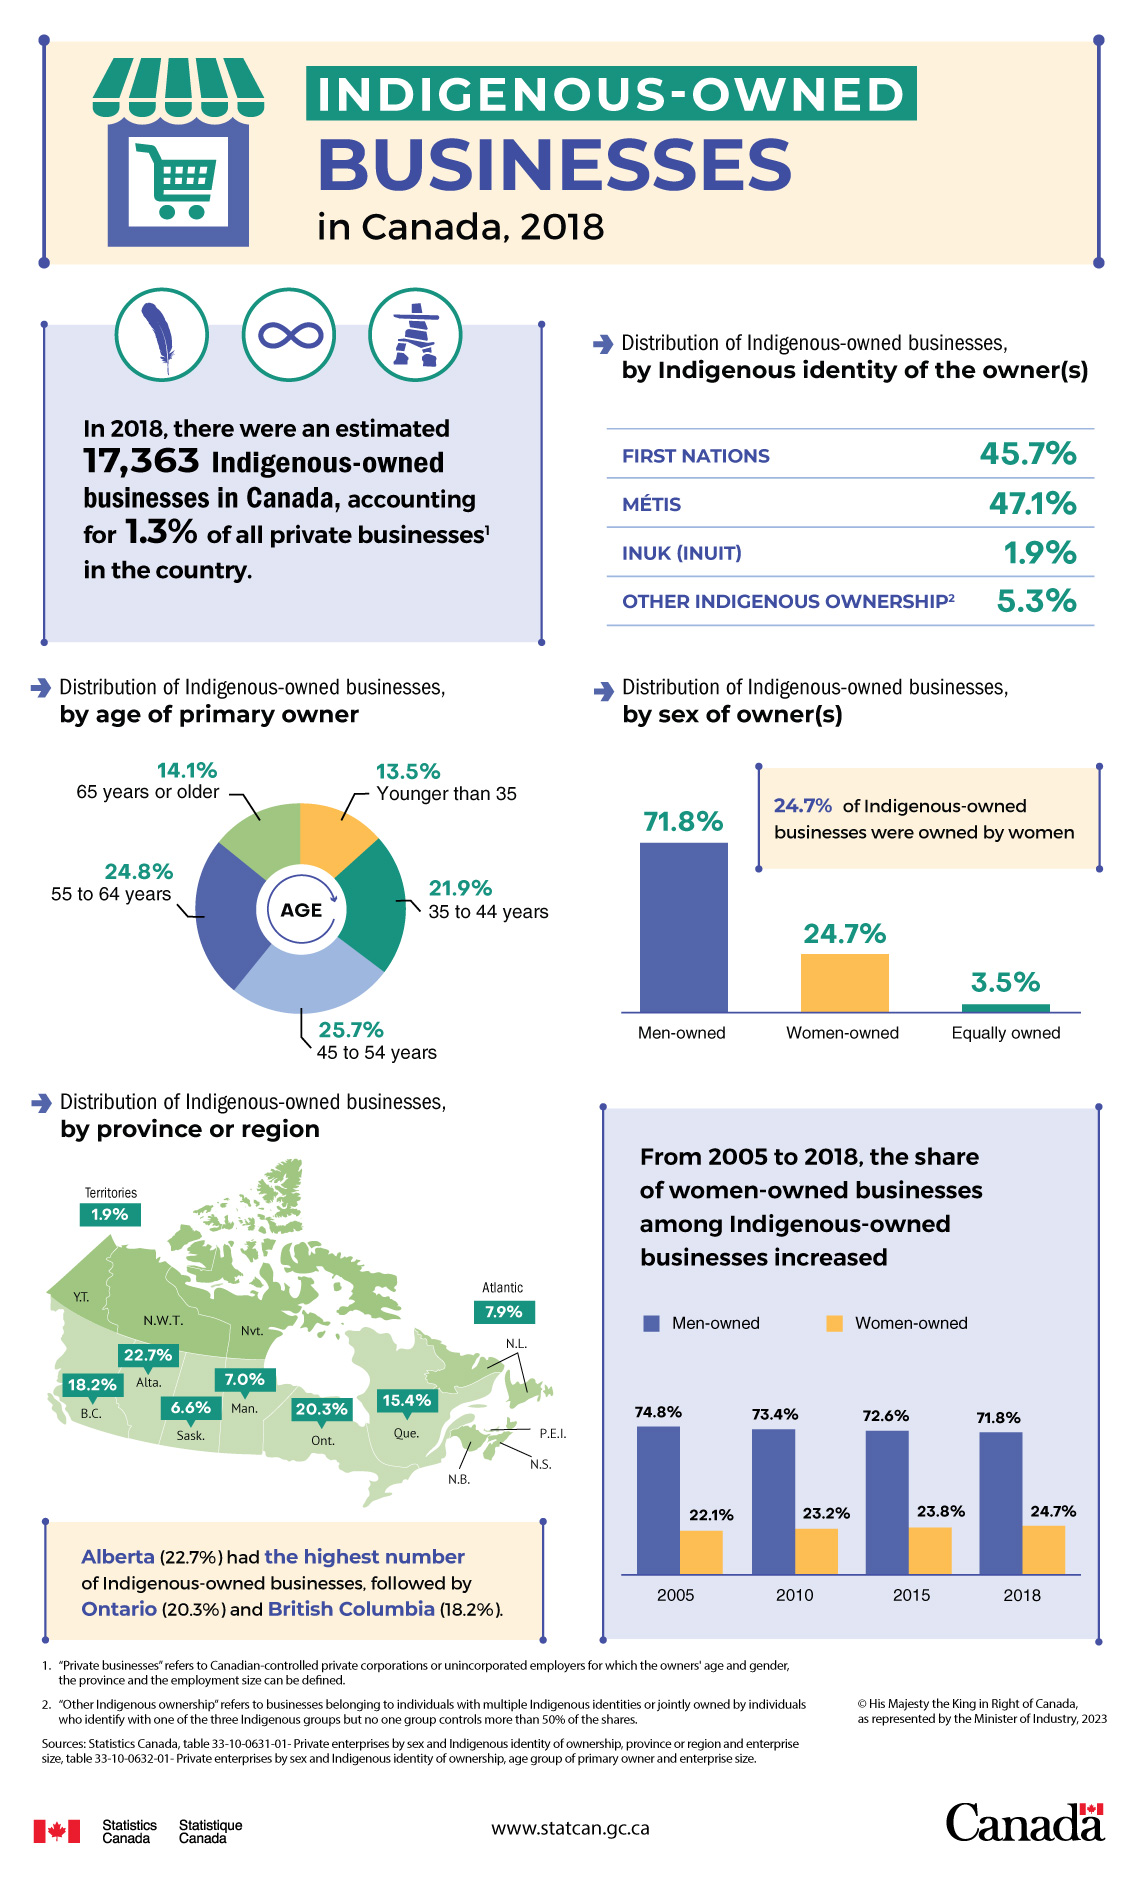 Infographic: Indigenous-owned businesses in Canada, 2018